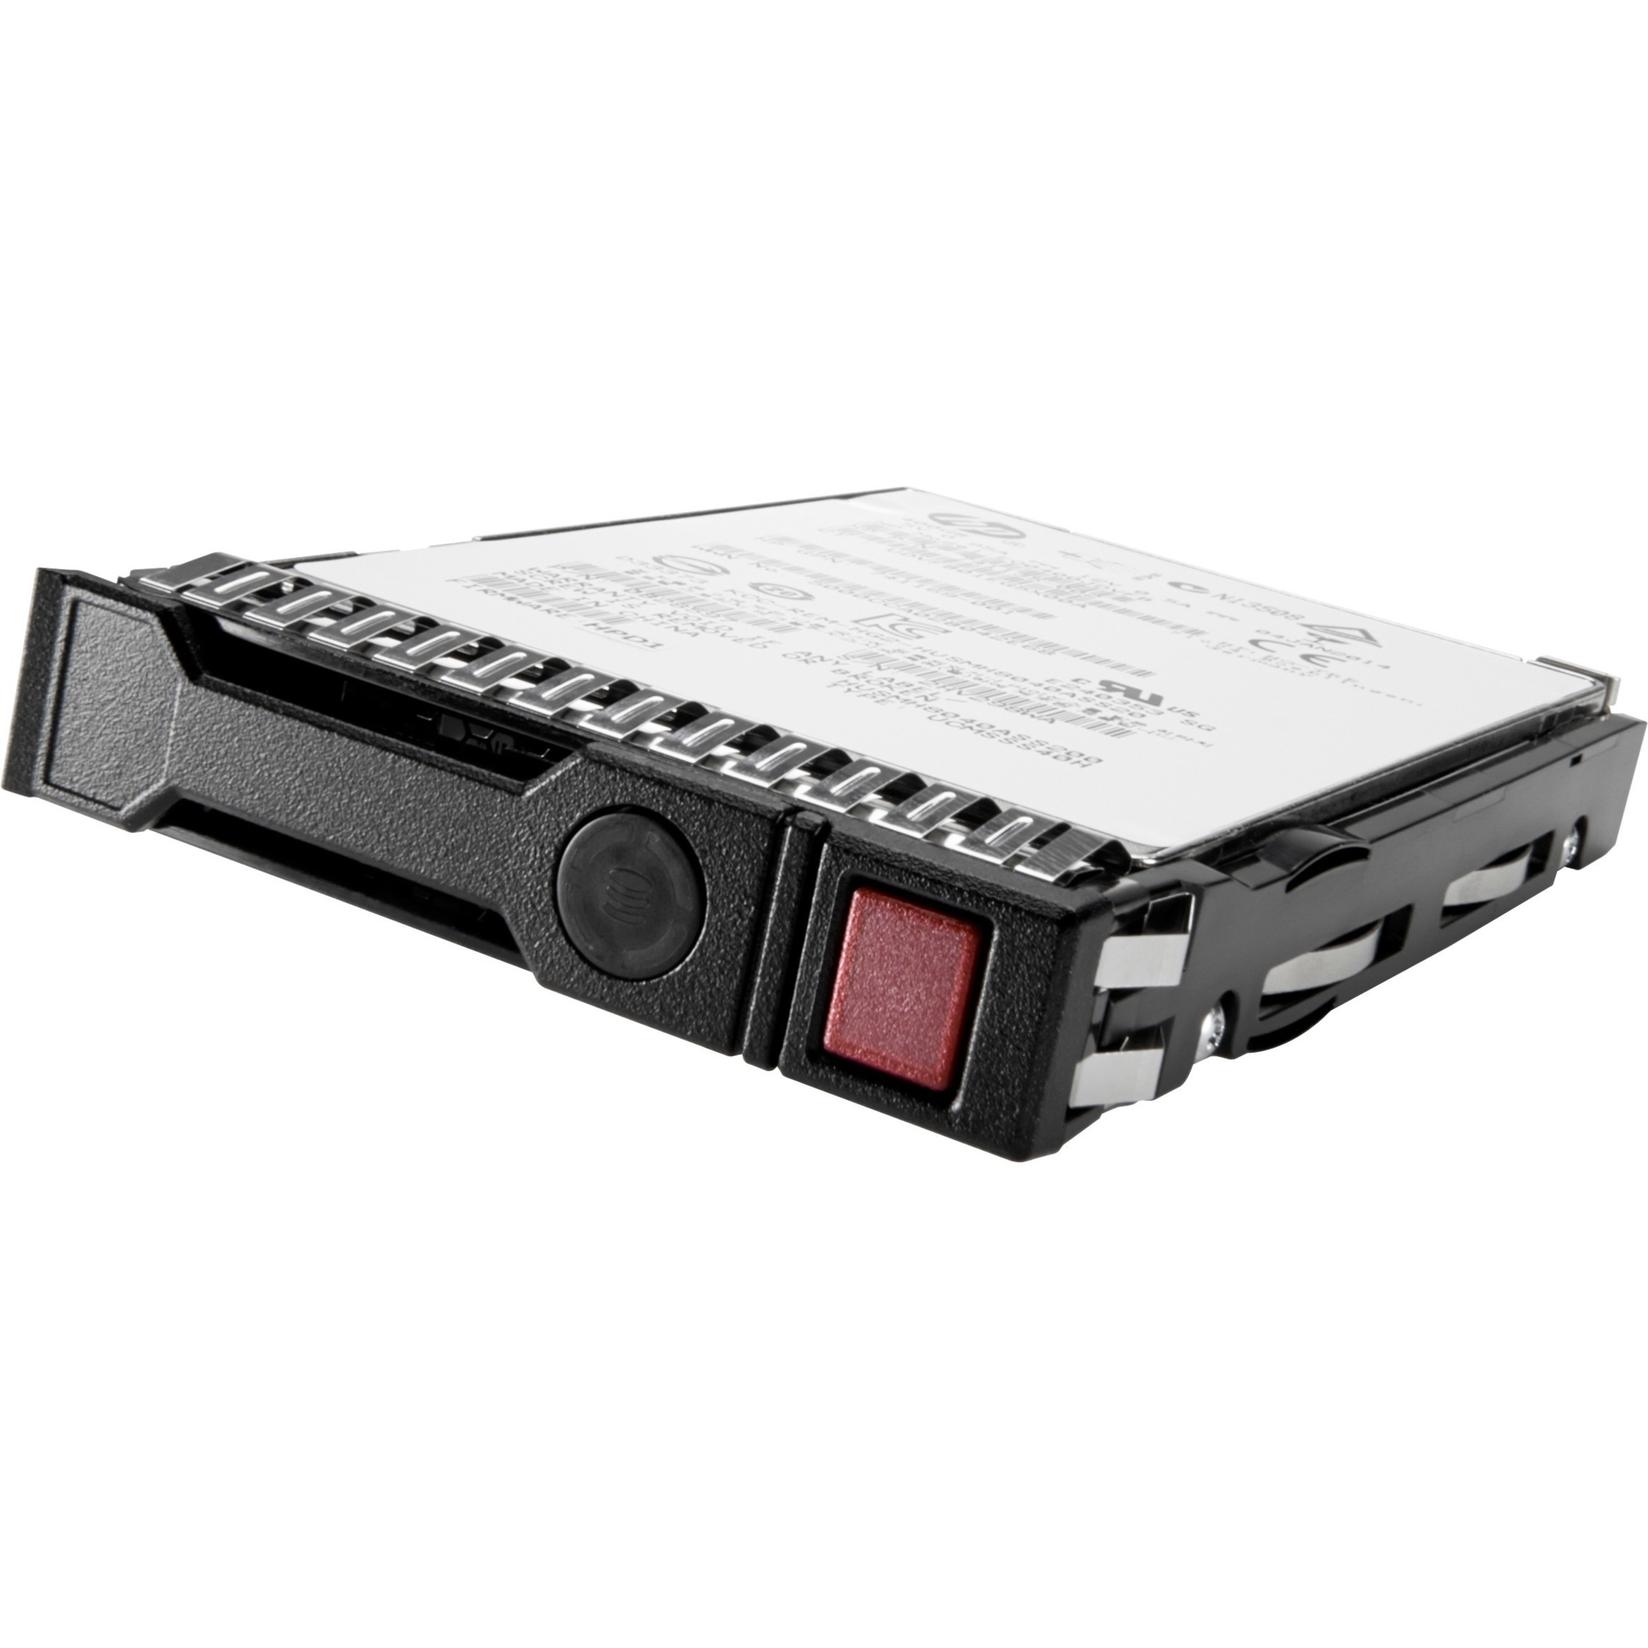 Selected image for HPE HDD 300GB/SAS/12G/15K/SFF(2.5in)/3Y Hard Drive